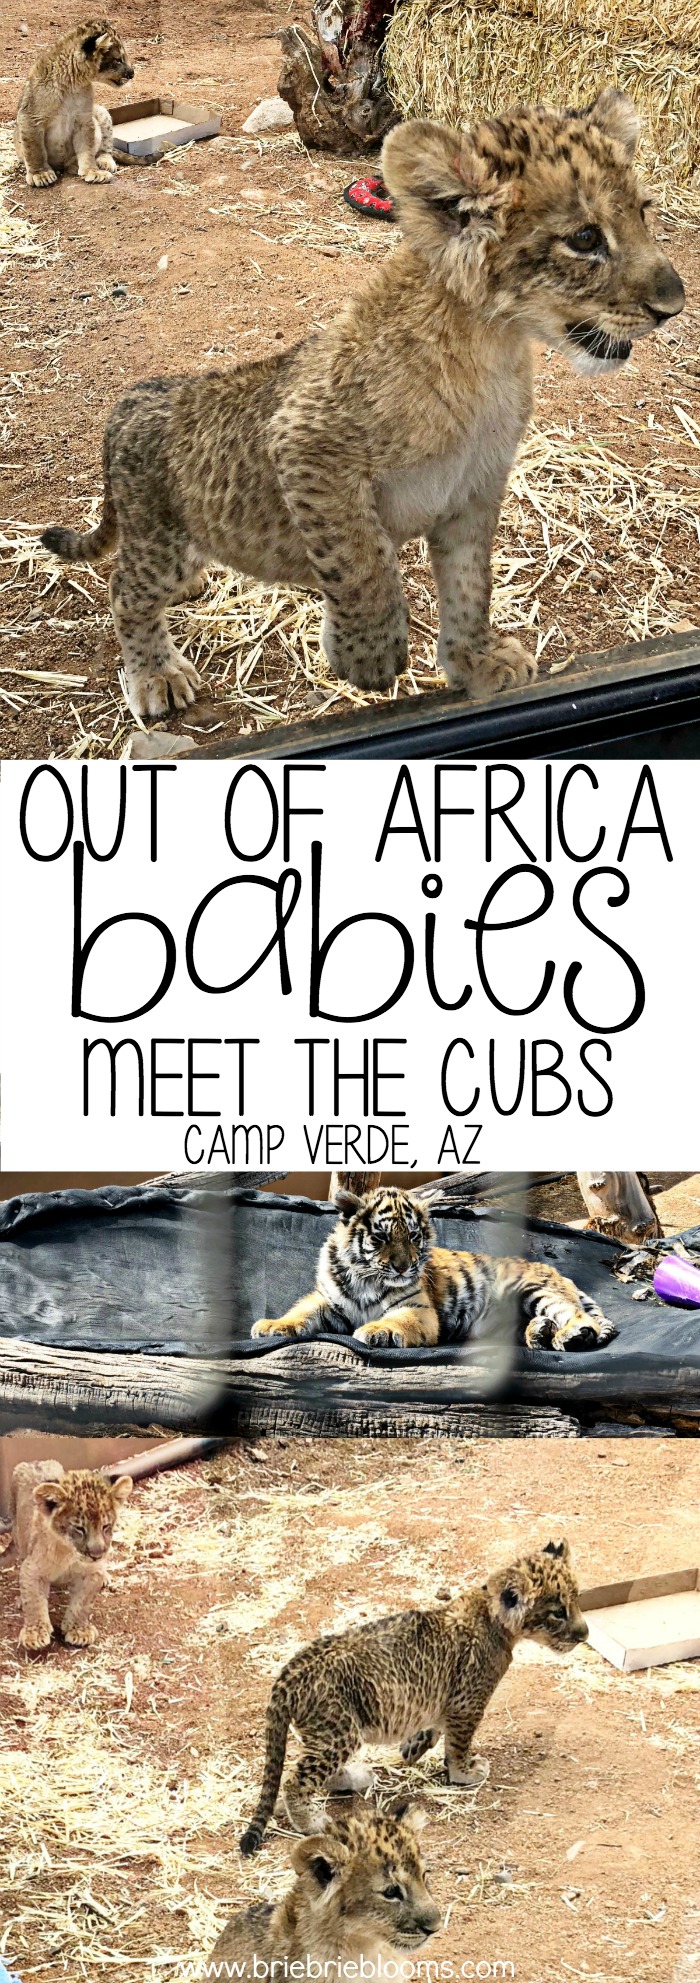 Visit Out of Africa Wildpark in Camp Verde, Arizona and meet their new babies. A rescued orphan cougar cub, Bengal tiger cub and three lion cubs are adorable!